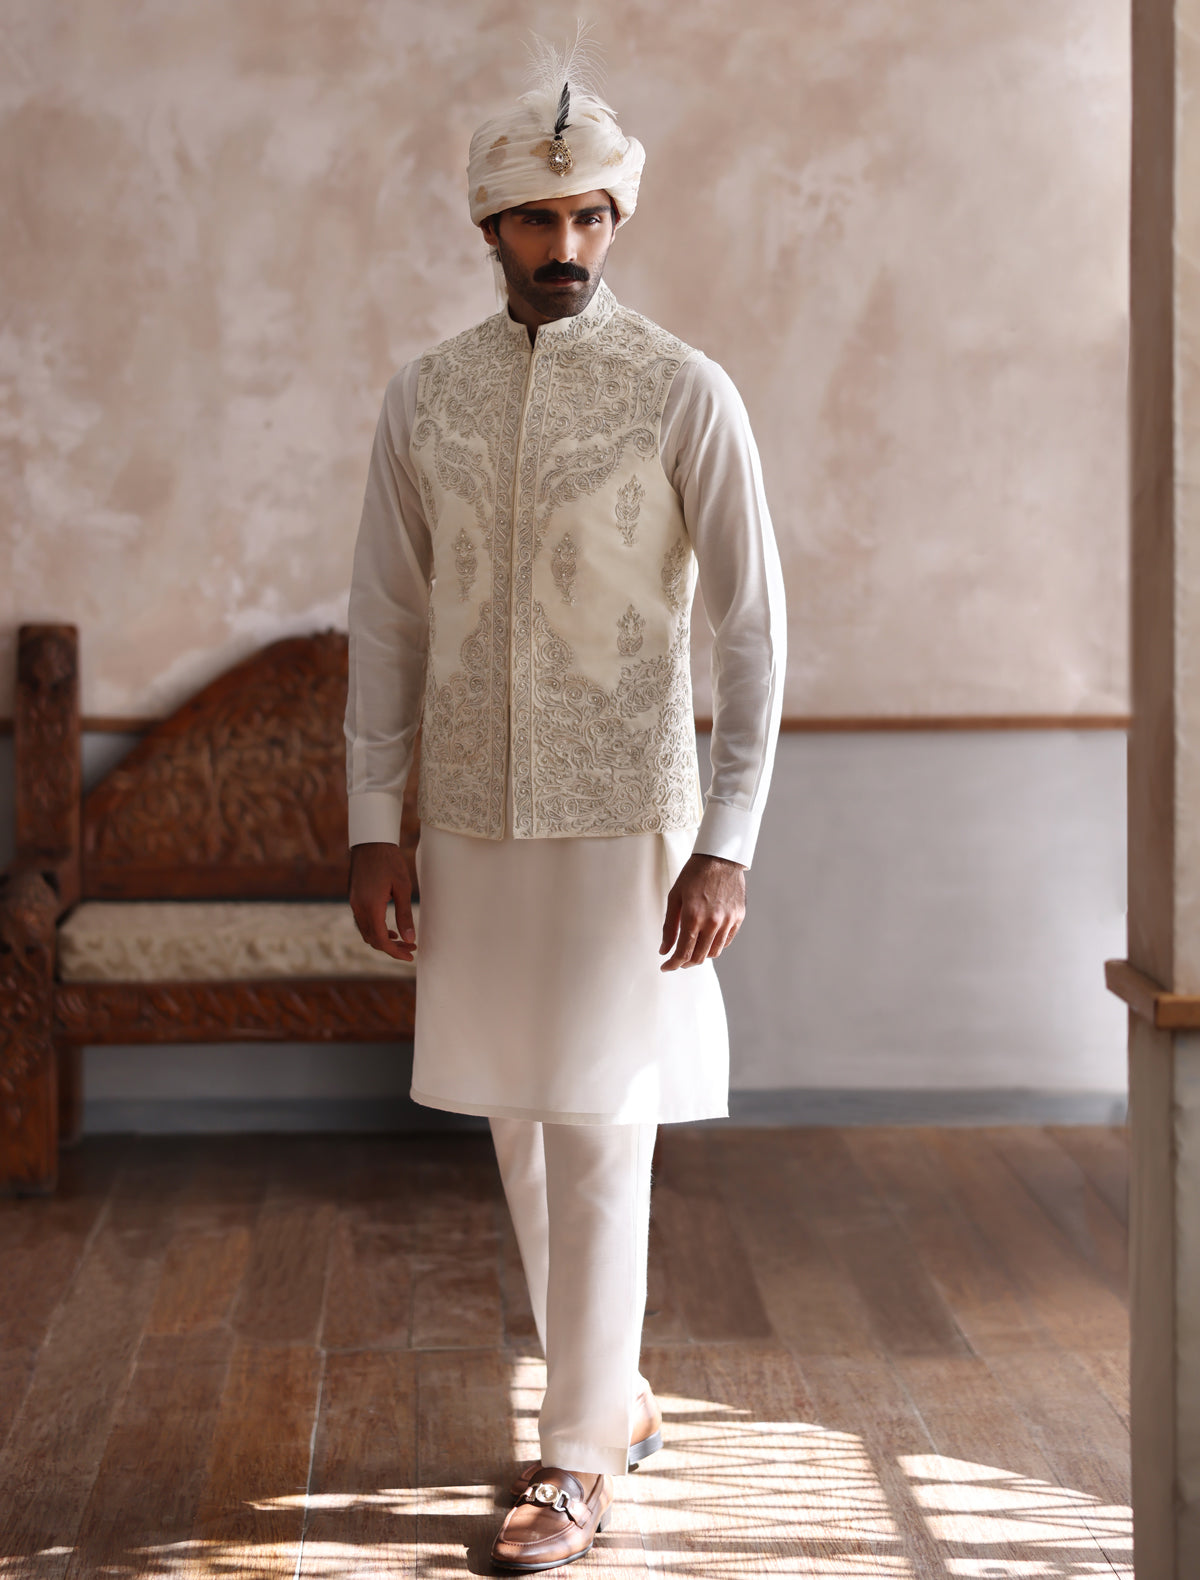 Limited Edition Waist Coat Crafted with Intricate Hand Embroidery-S